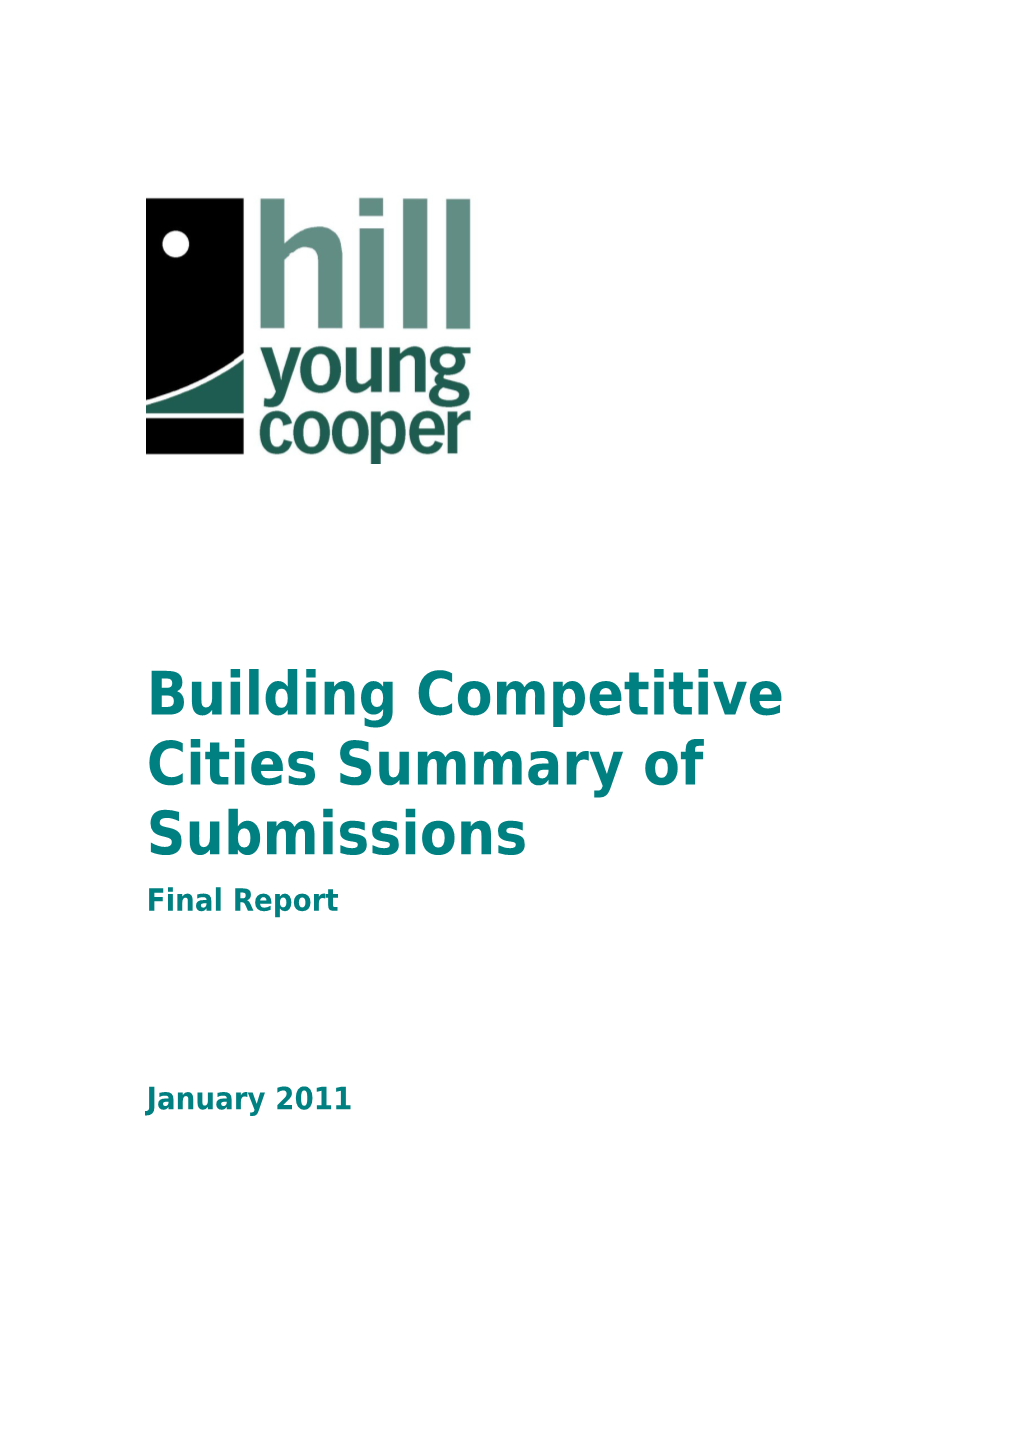 Building-Comp-Cities-Summary-Submissions Final